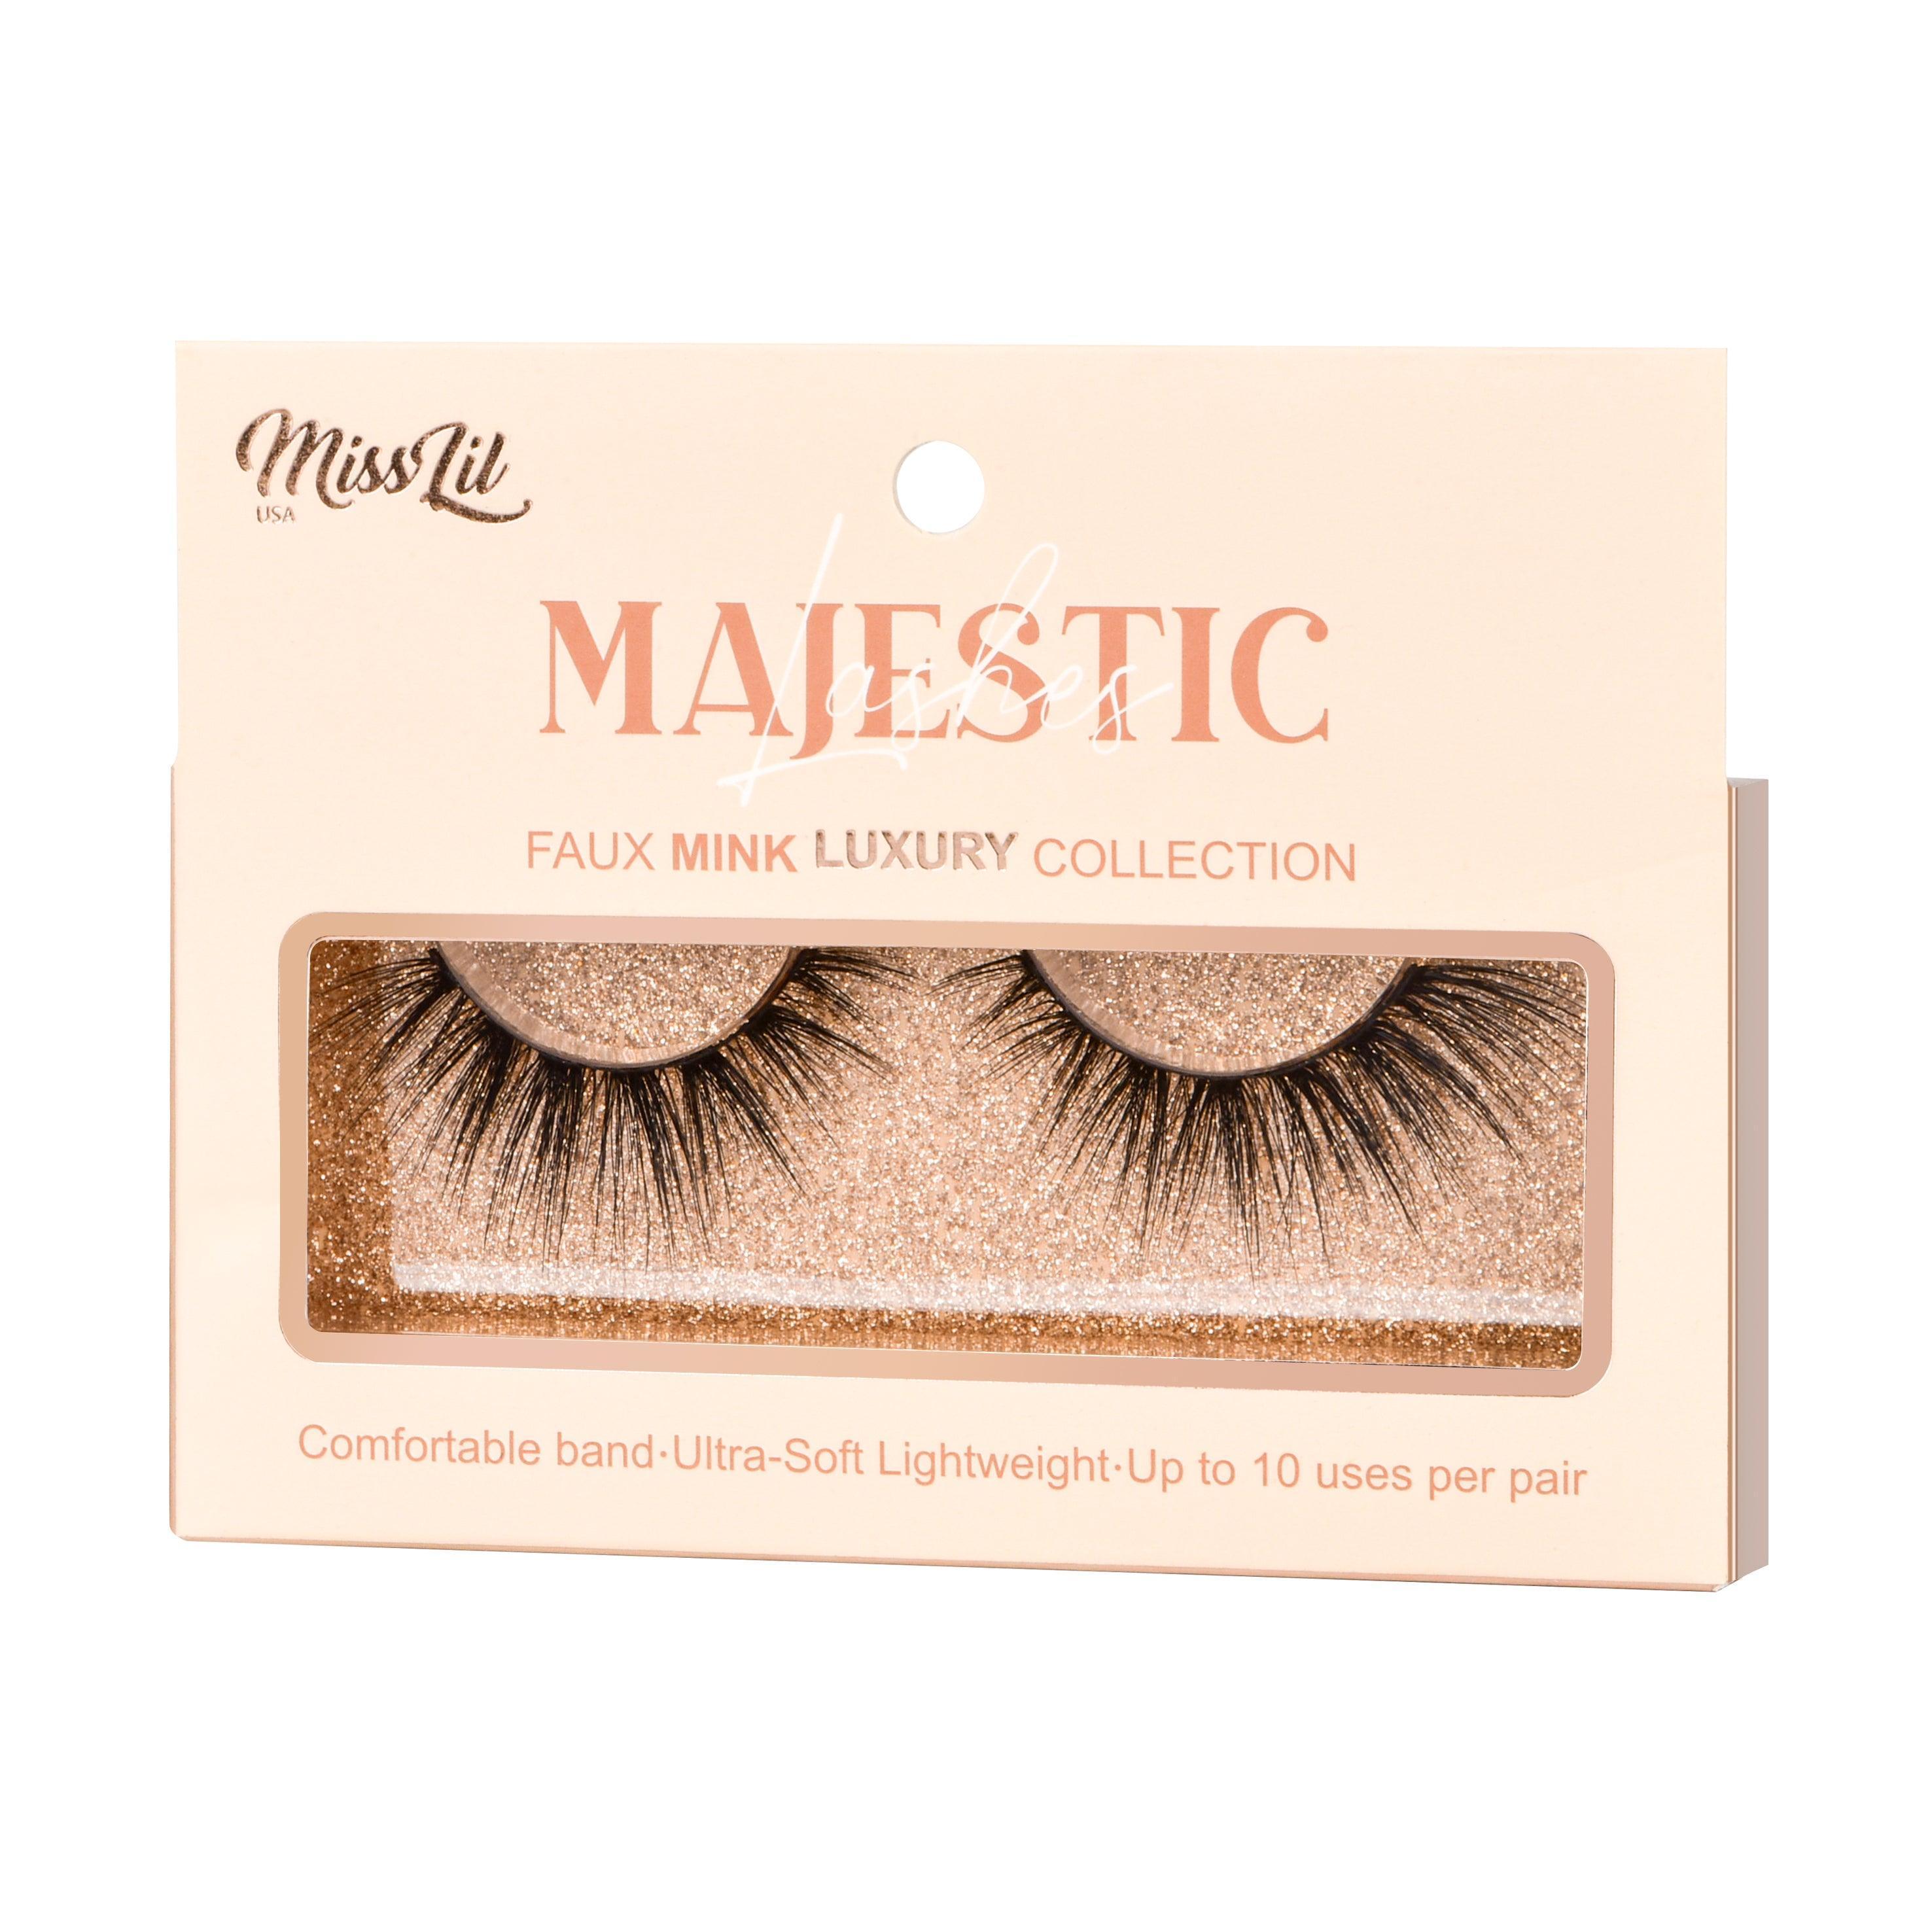 Majestic Collection 18 fake lashes - Miss Lil USA Wholesale